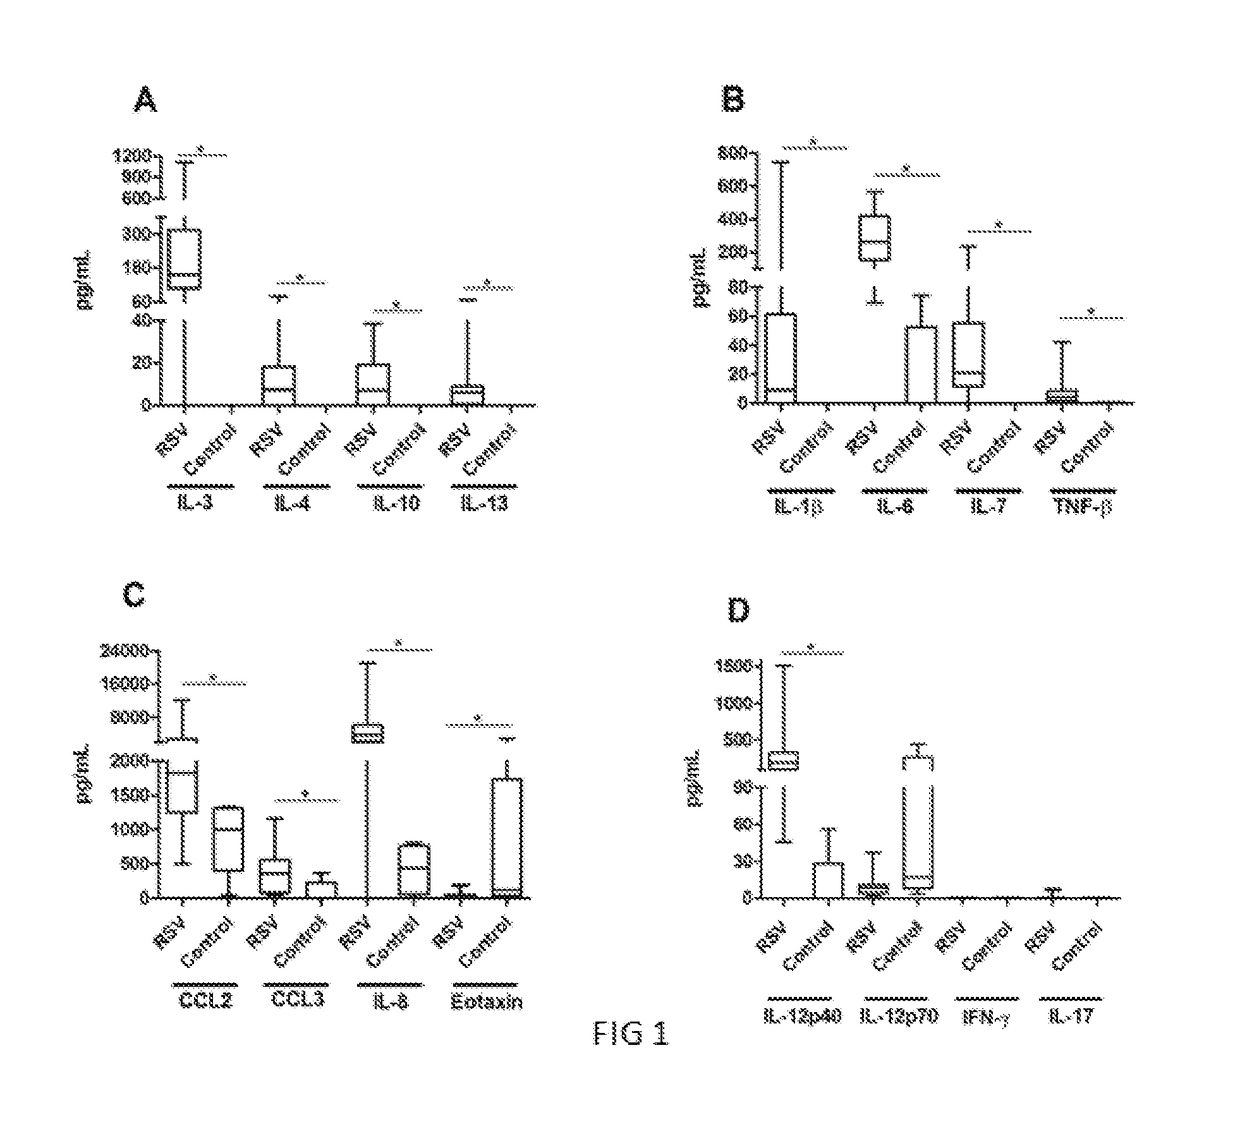 USE OF IL-3, IL-33, AND IL-12p40 FOR CHARACTERIZATION OF THE RESPIRATORY INFECTIONS BY SYNCYTIAL RESPIRATORY VIRUS